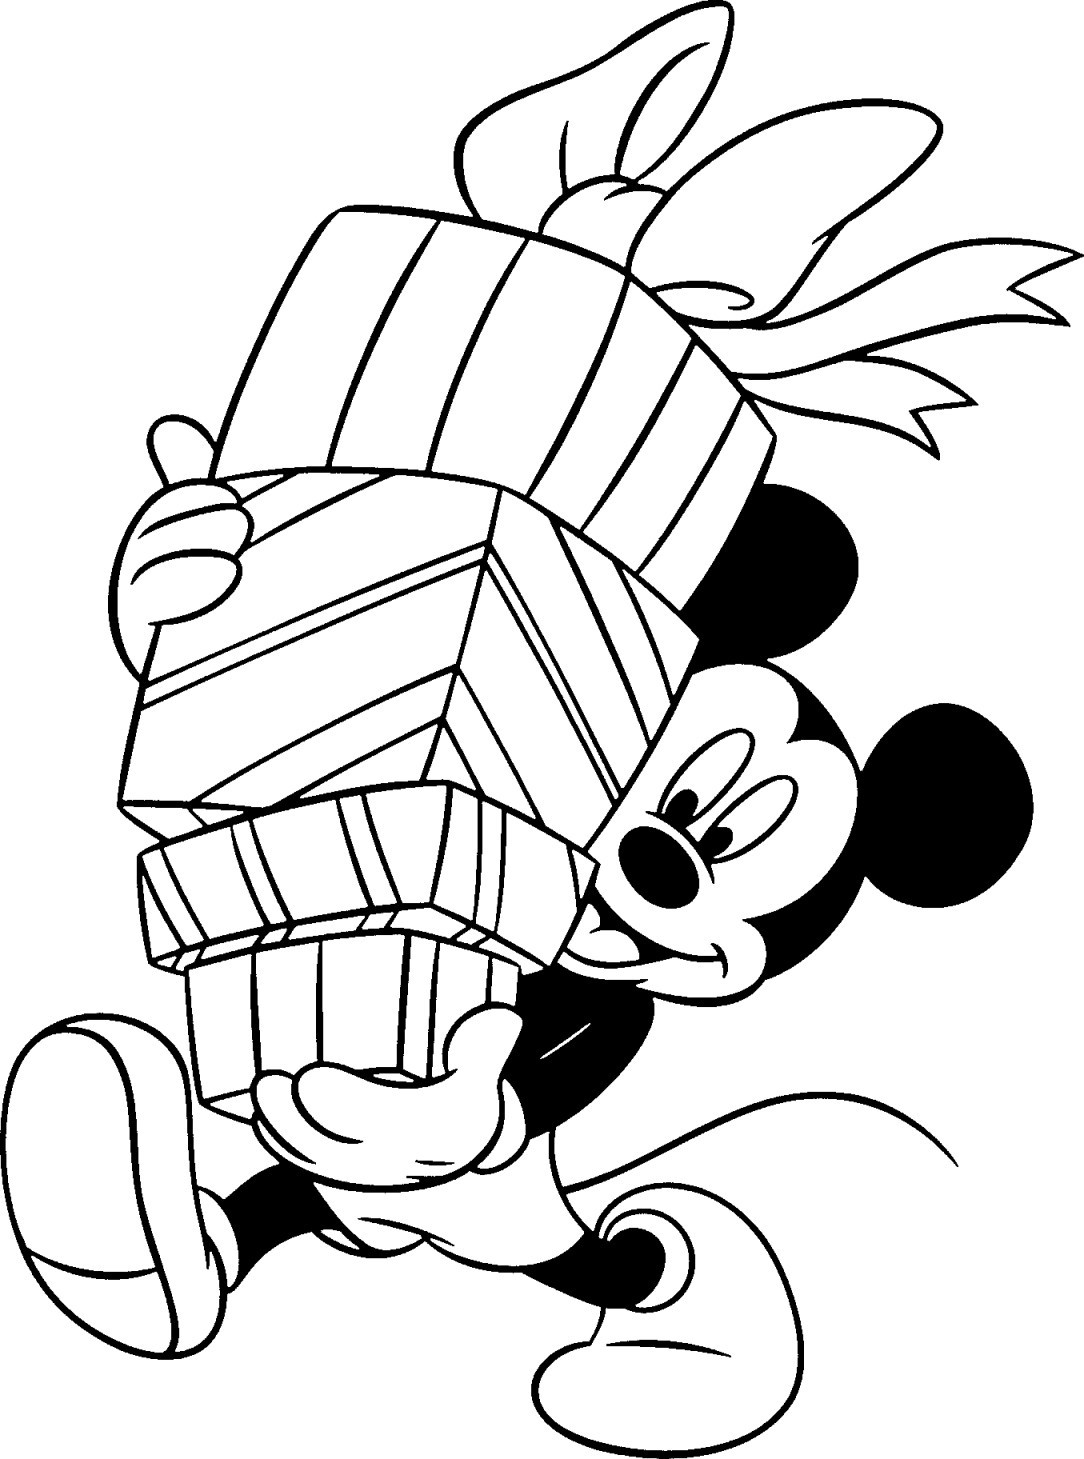 Disney Christmas Coloring Pages
 Free Disney Christmas Printable Coloring Pages for Kids